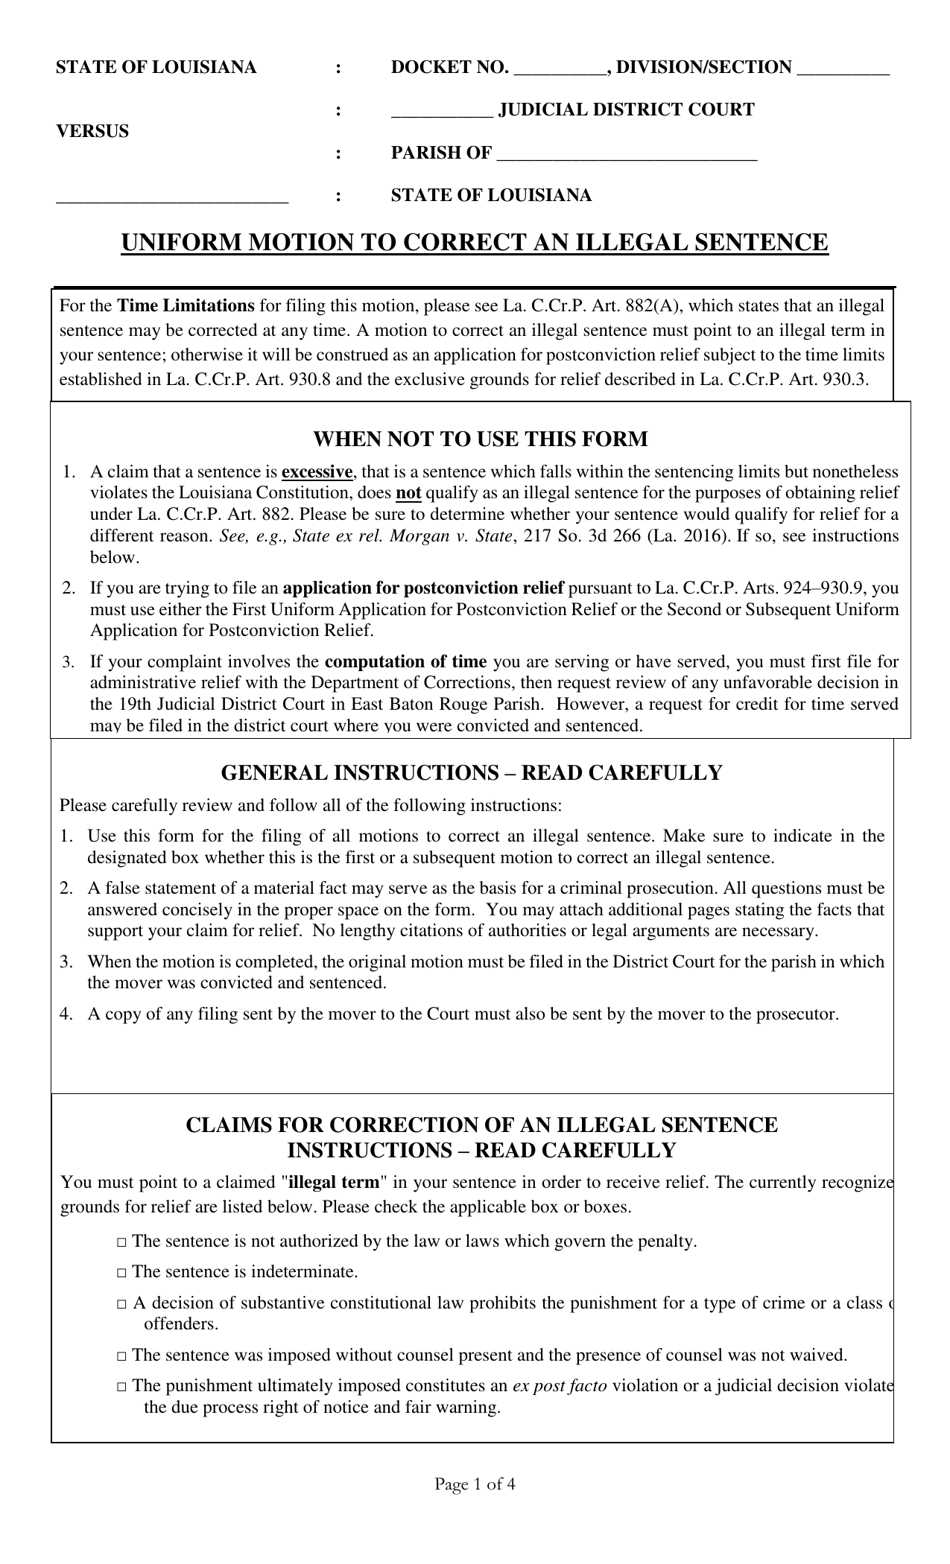 Uniform Motion to Correct an Illegal Sentence - Louisiana, Page 1